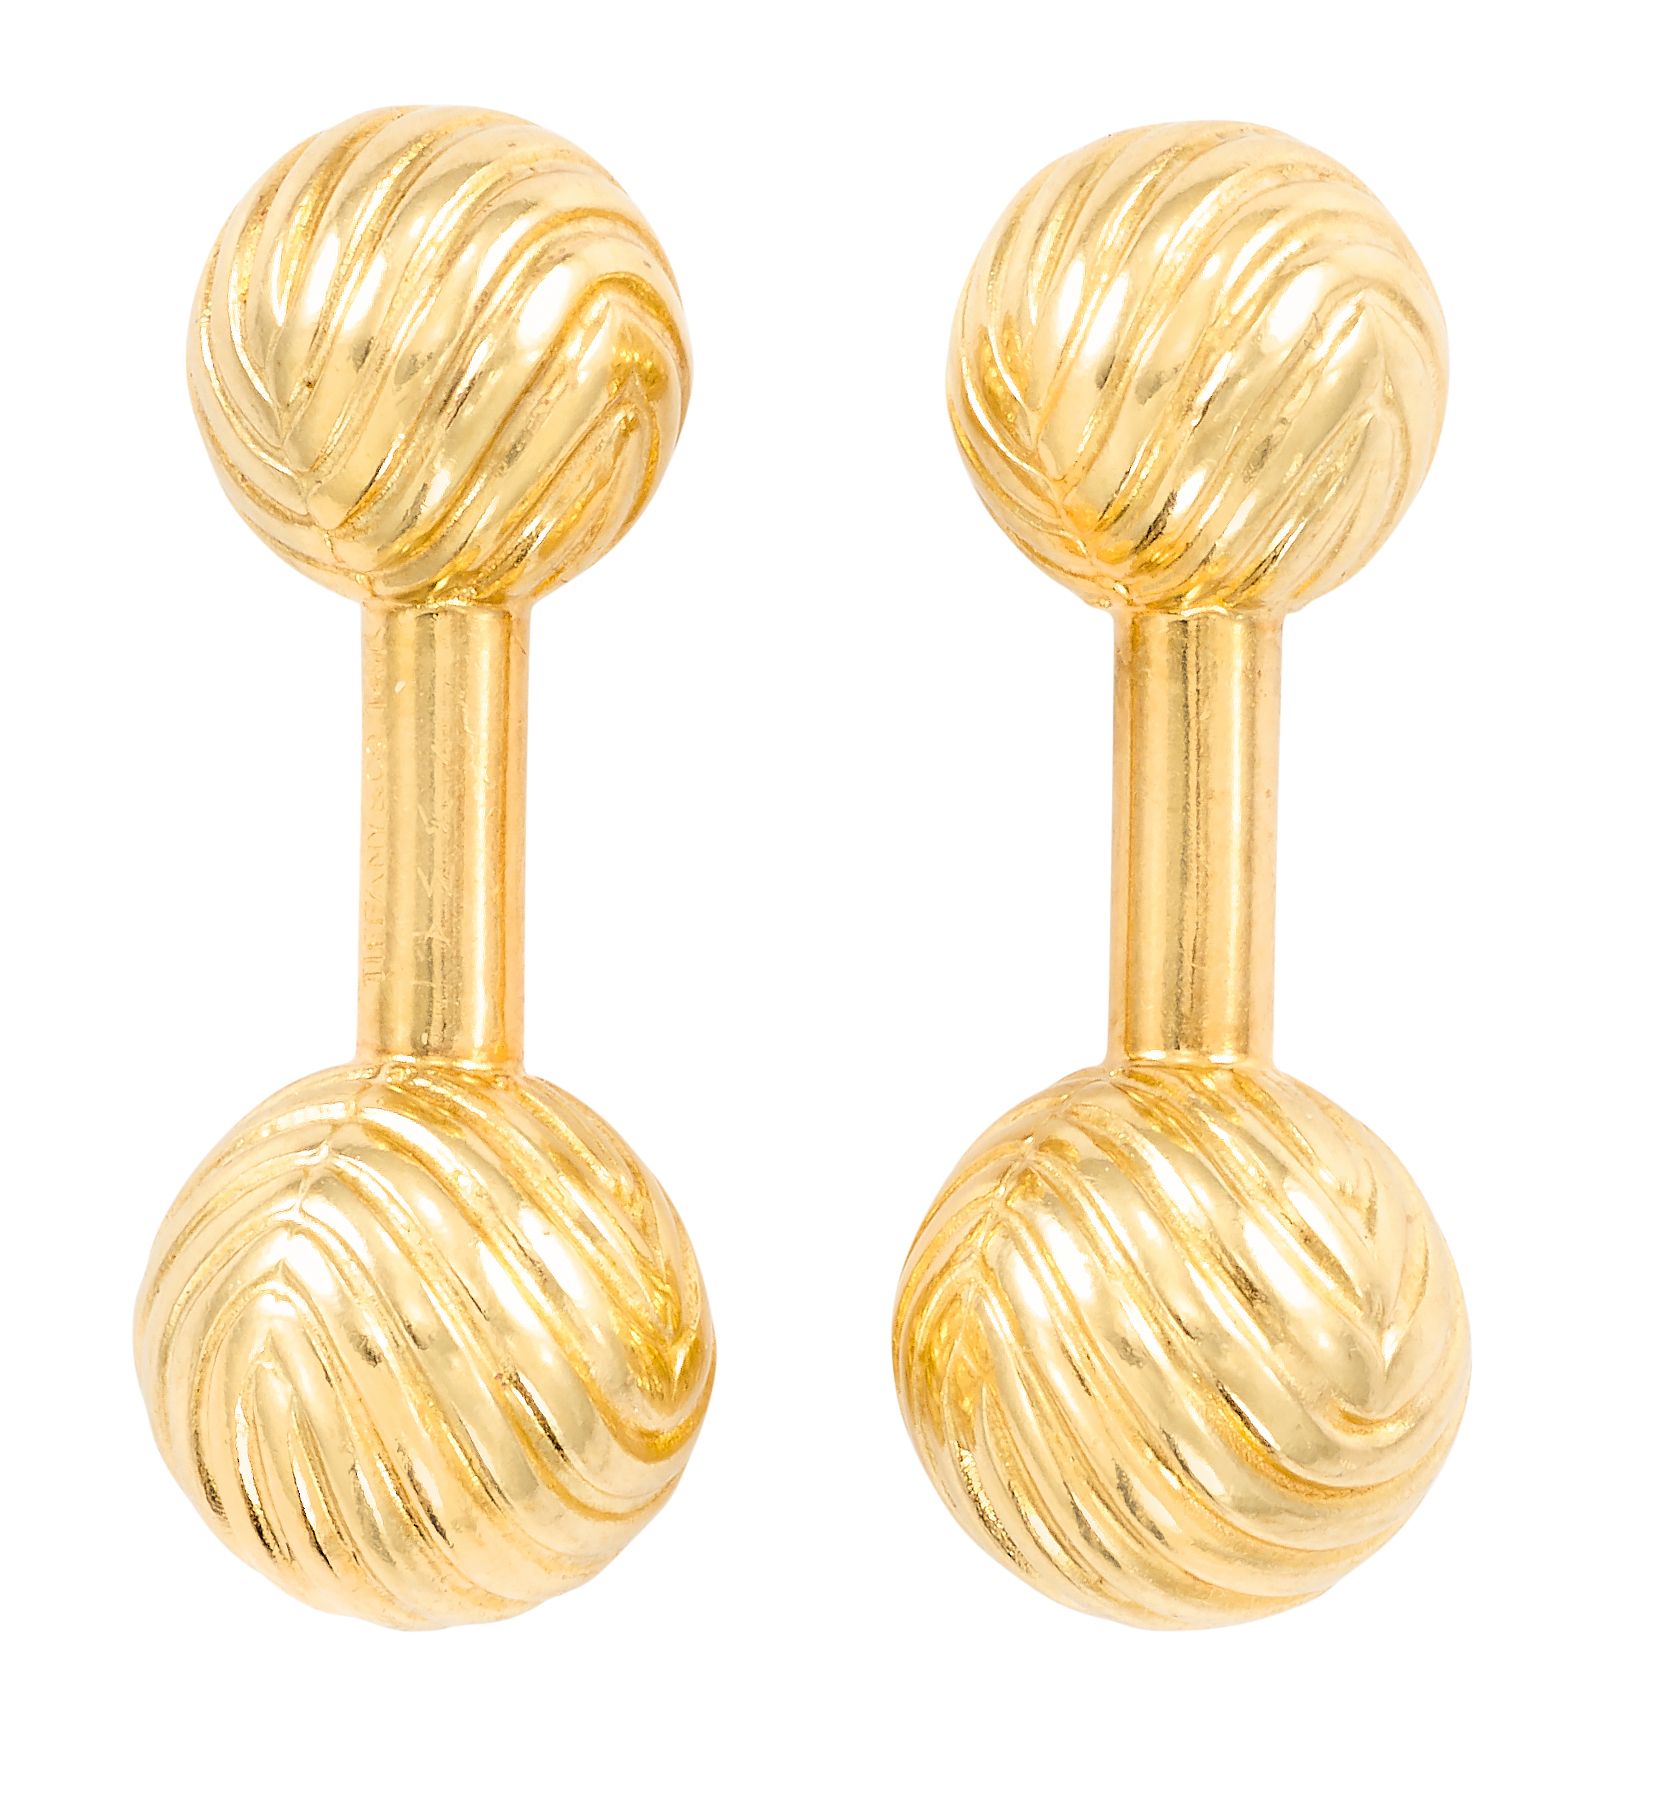 TIFFANY & CO Pair of 14K yellow gold cufflinks with gadrooned ball design
Signed&hellip;